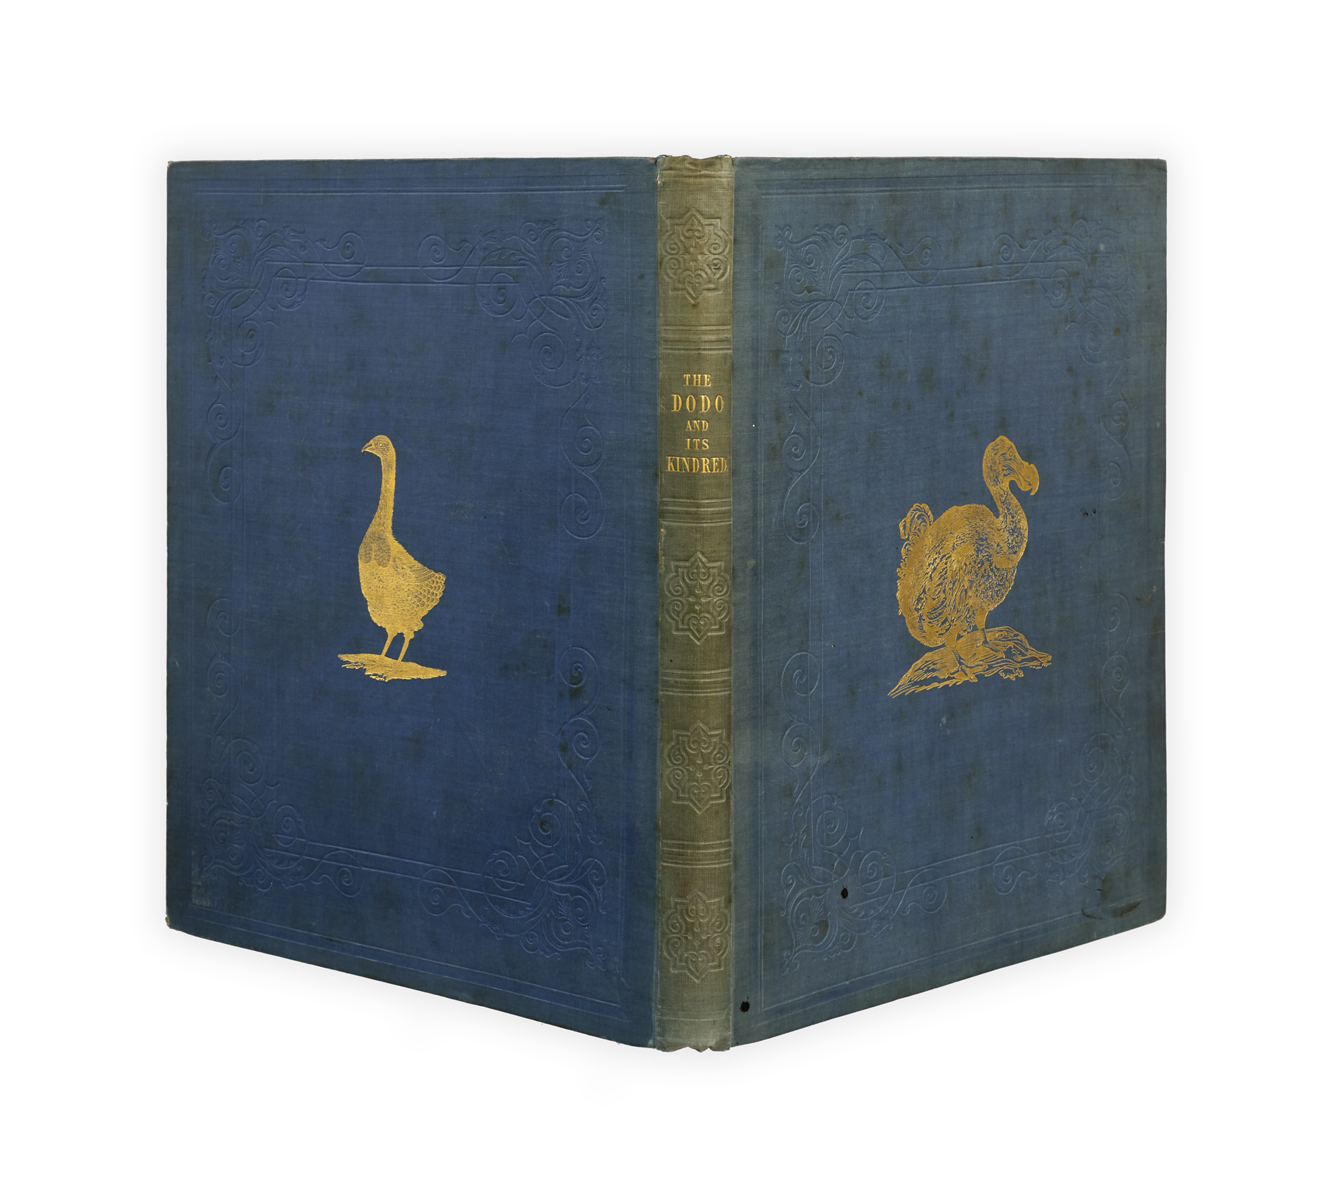 G. MELVILLE. The Dodo and its Kindred; or, the History, Affinities and Osteology of the Dodo, Solitaire and other extinct Birds of the Islands Mauritius, Rodriguez, and Bourbon …